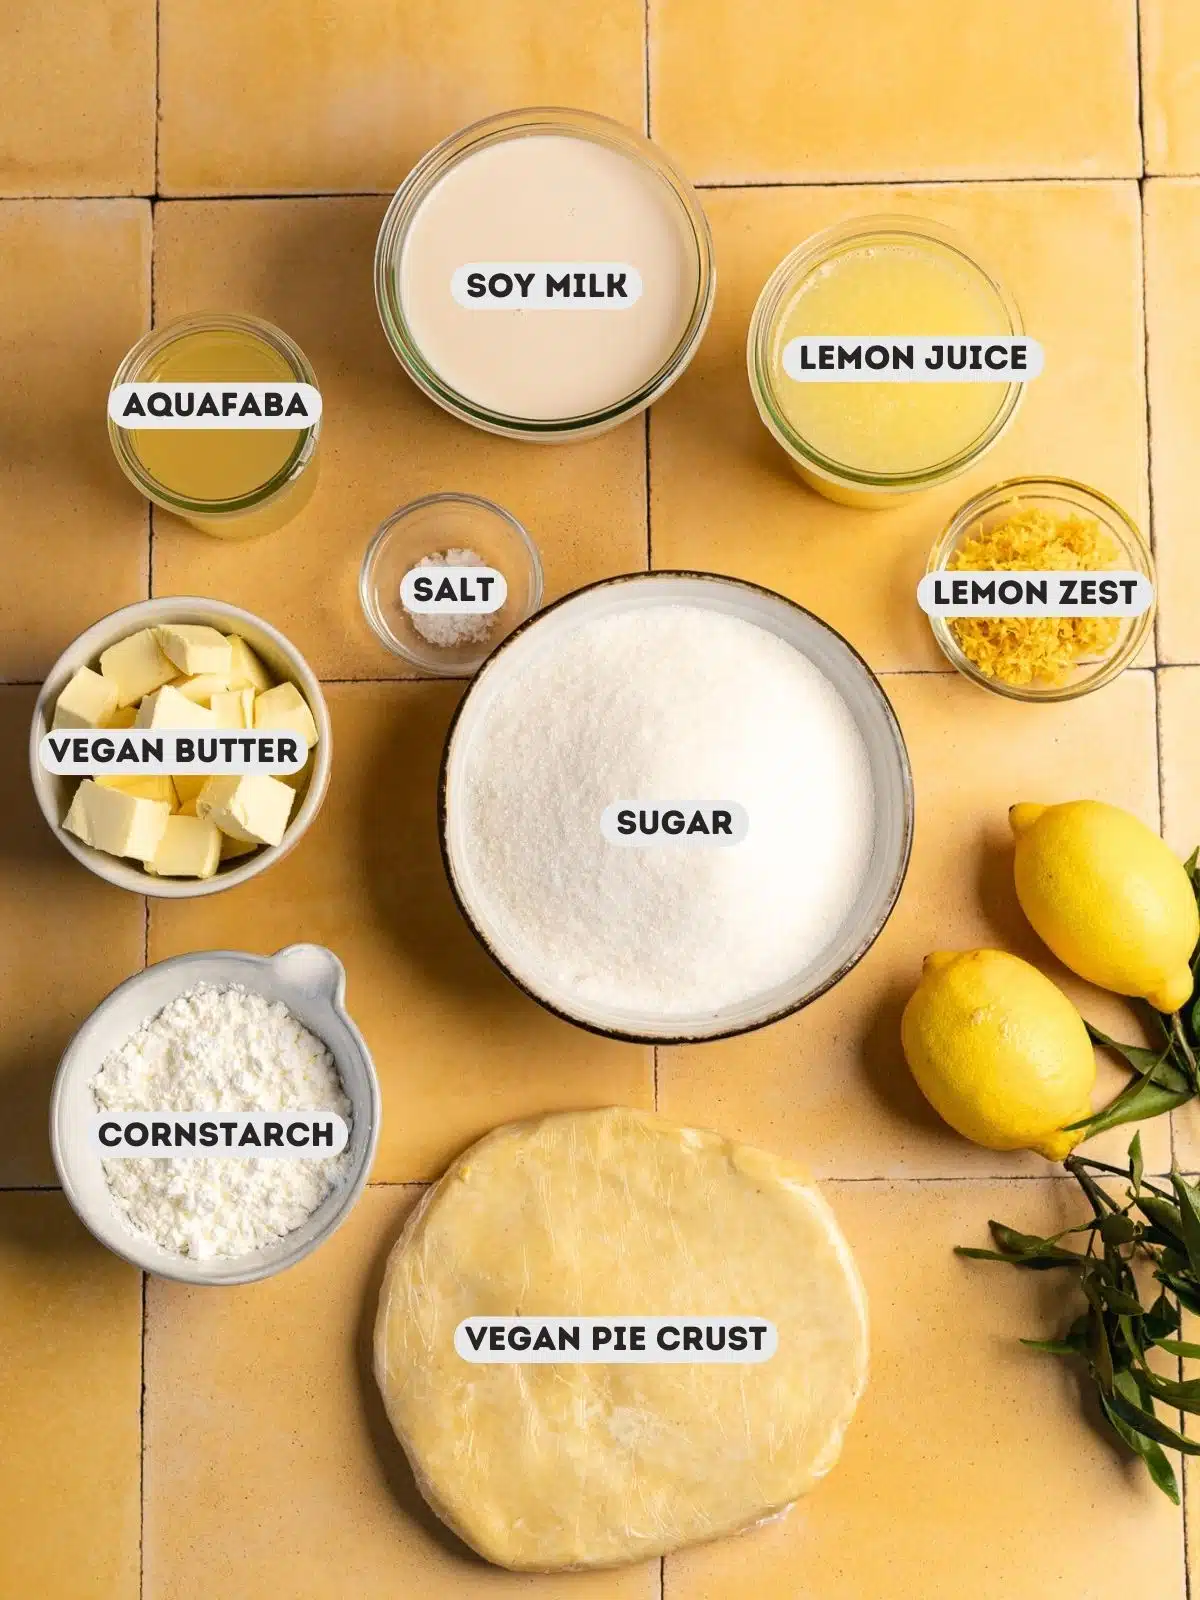 ingredients for eggless meringue lemon pie measured out in bowls on a yellow tiled surface with text overlay.